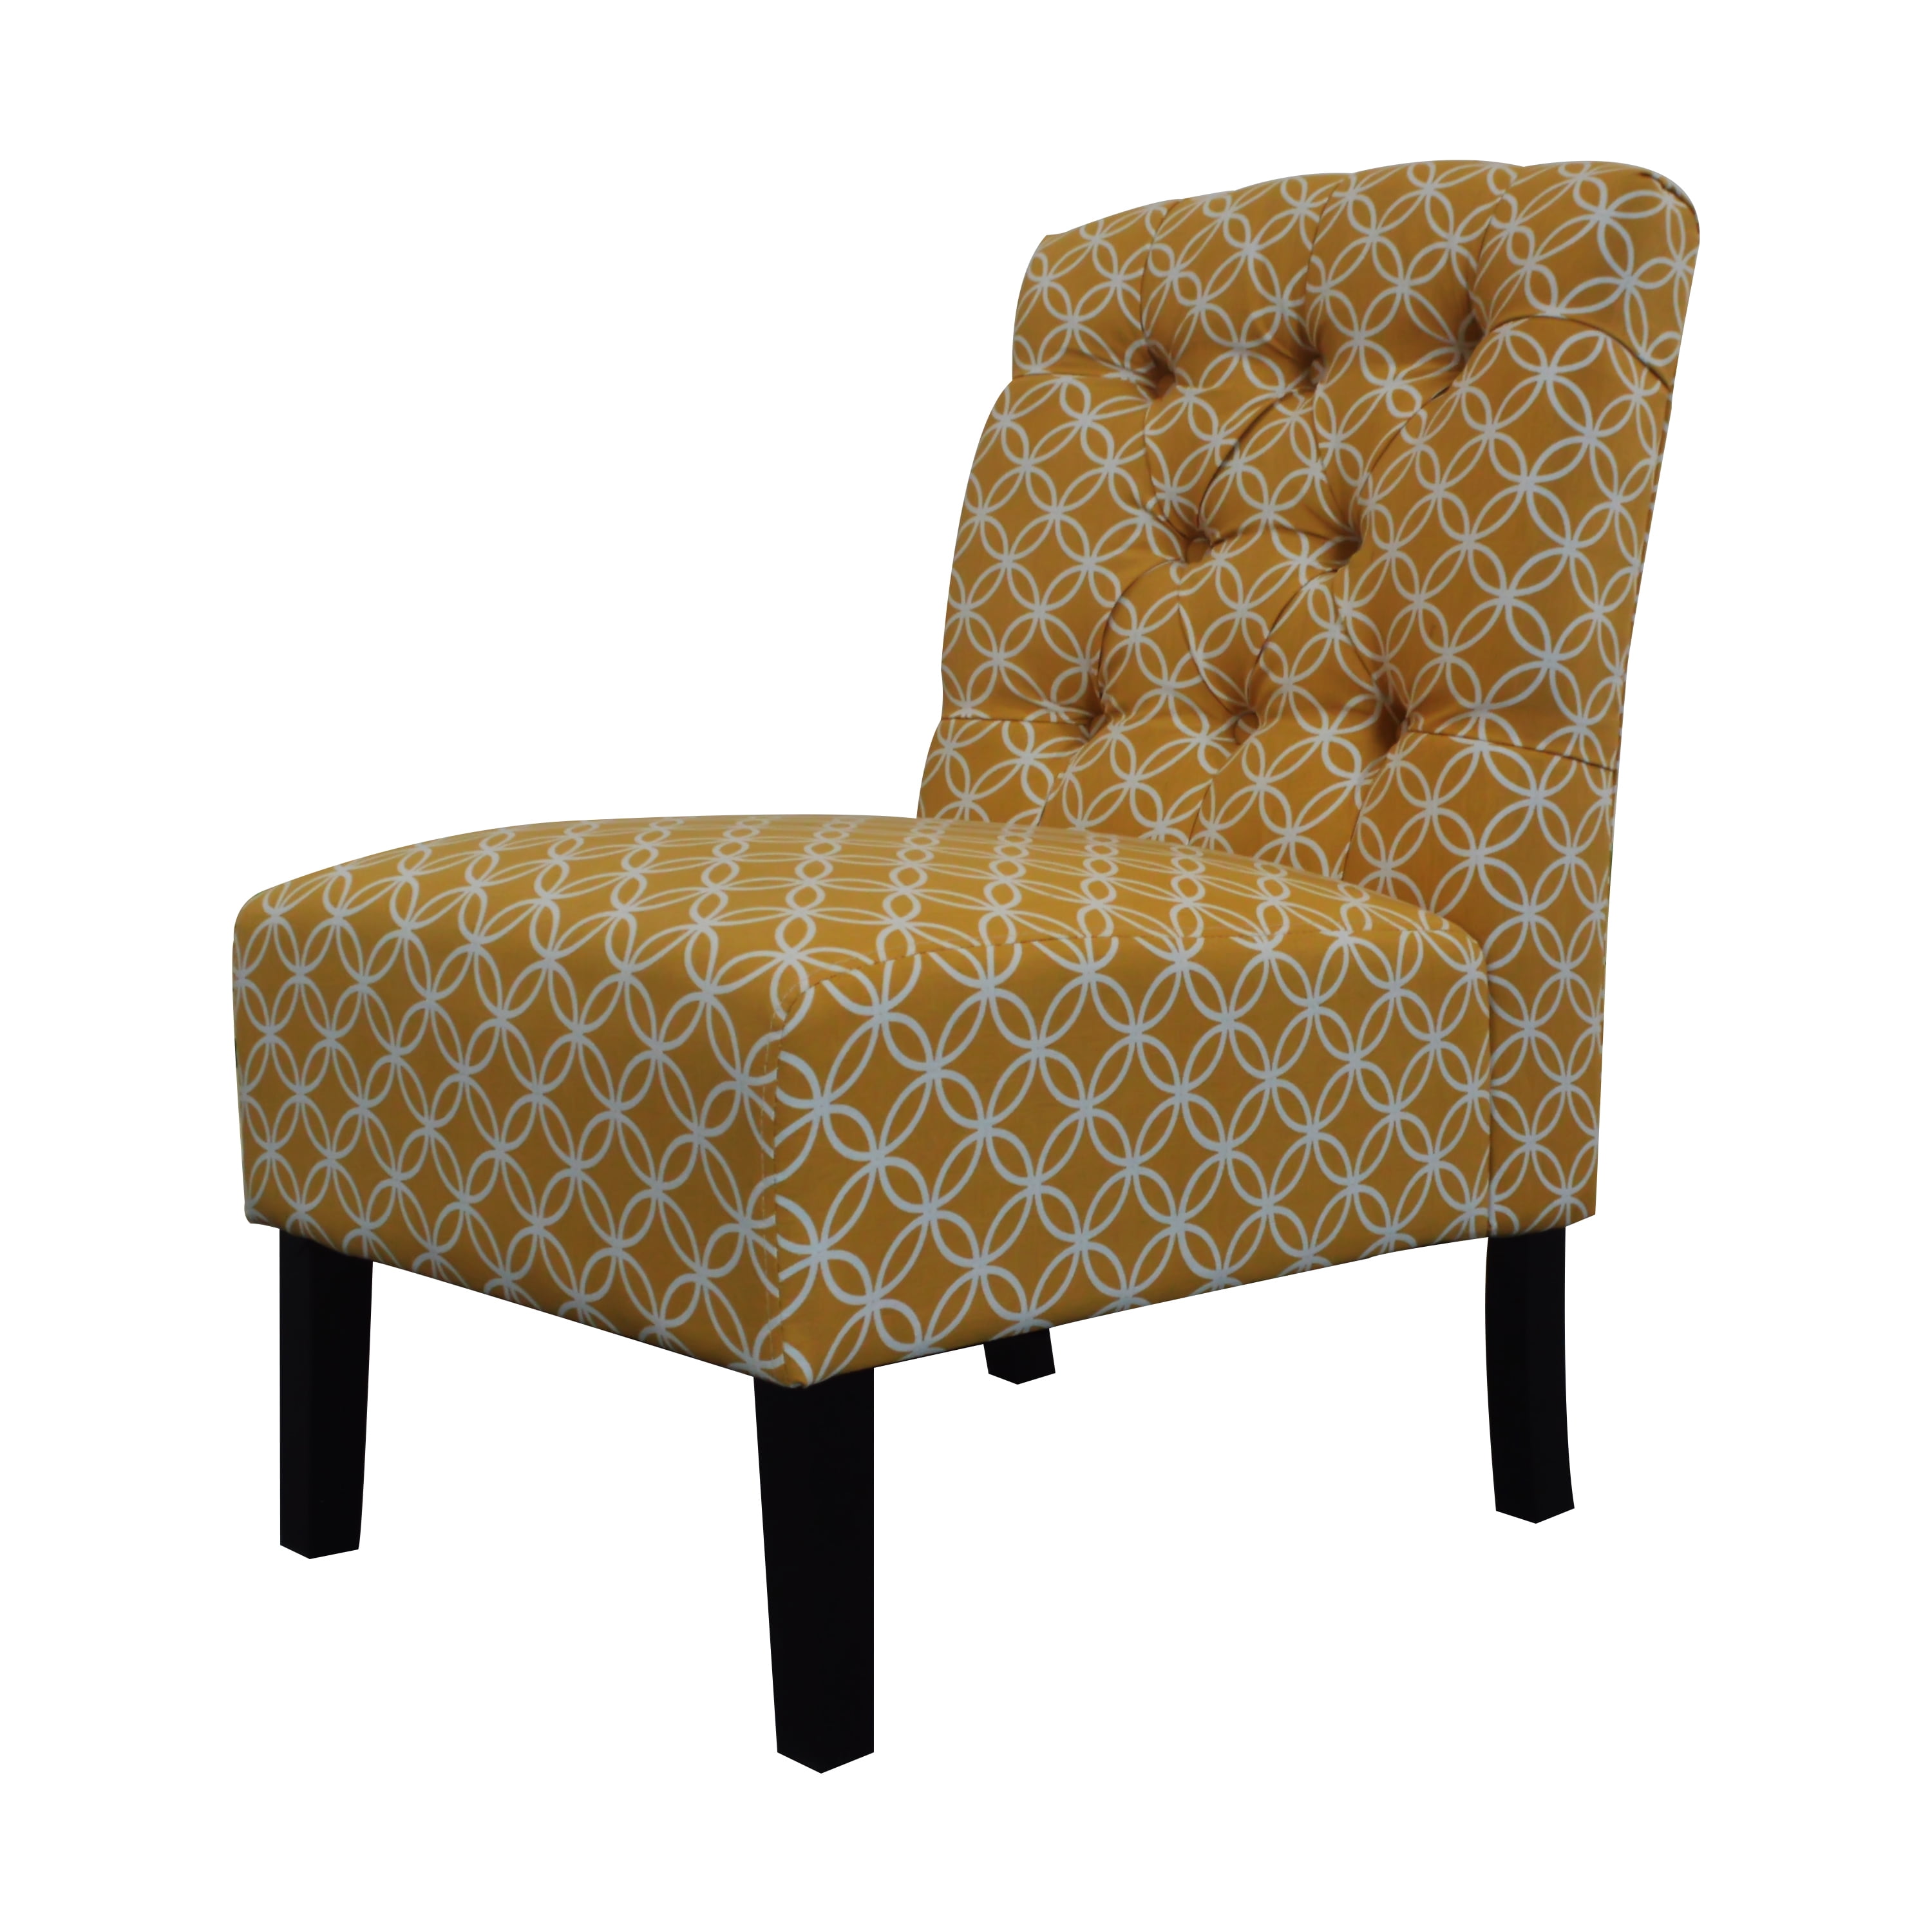 Upholstered Armless Accent Chair In Geometric Yellow/White ...